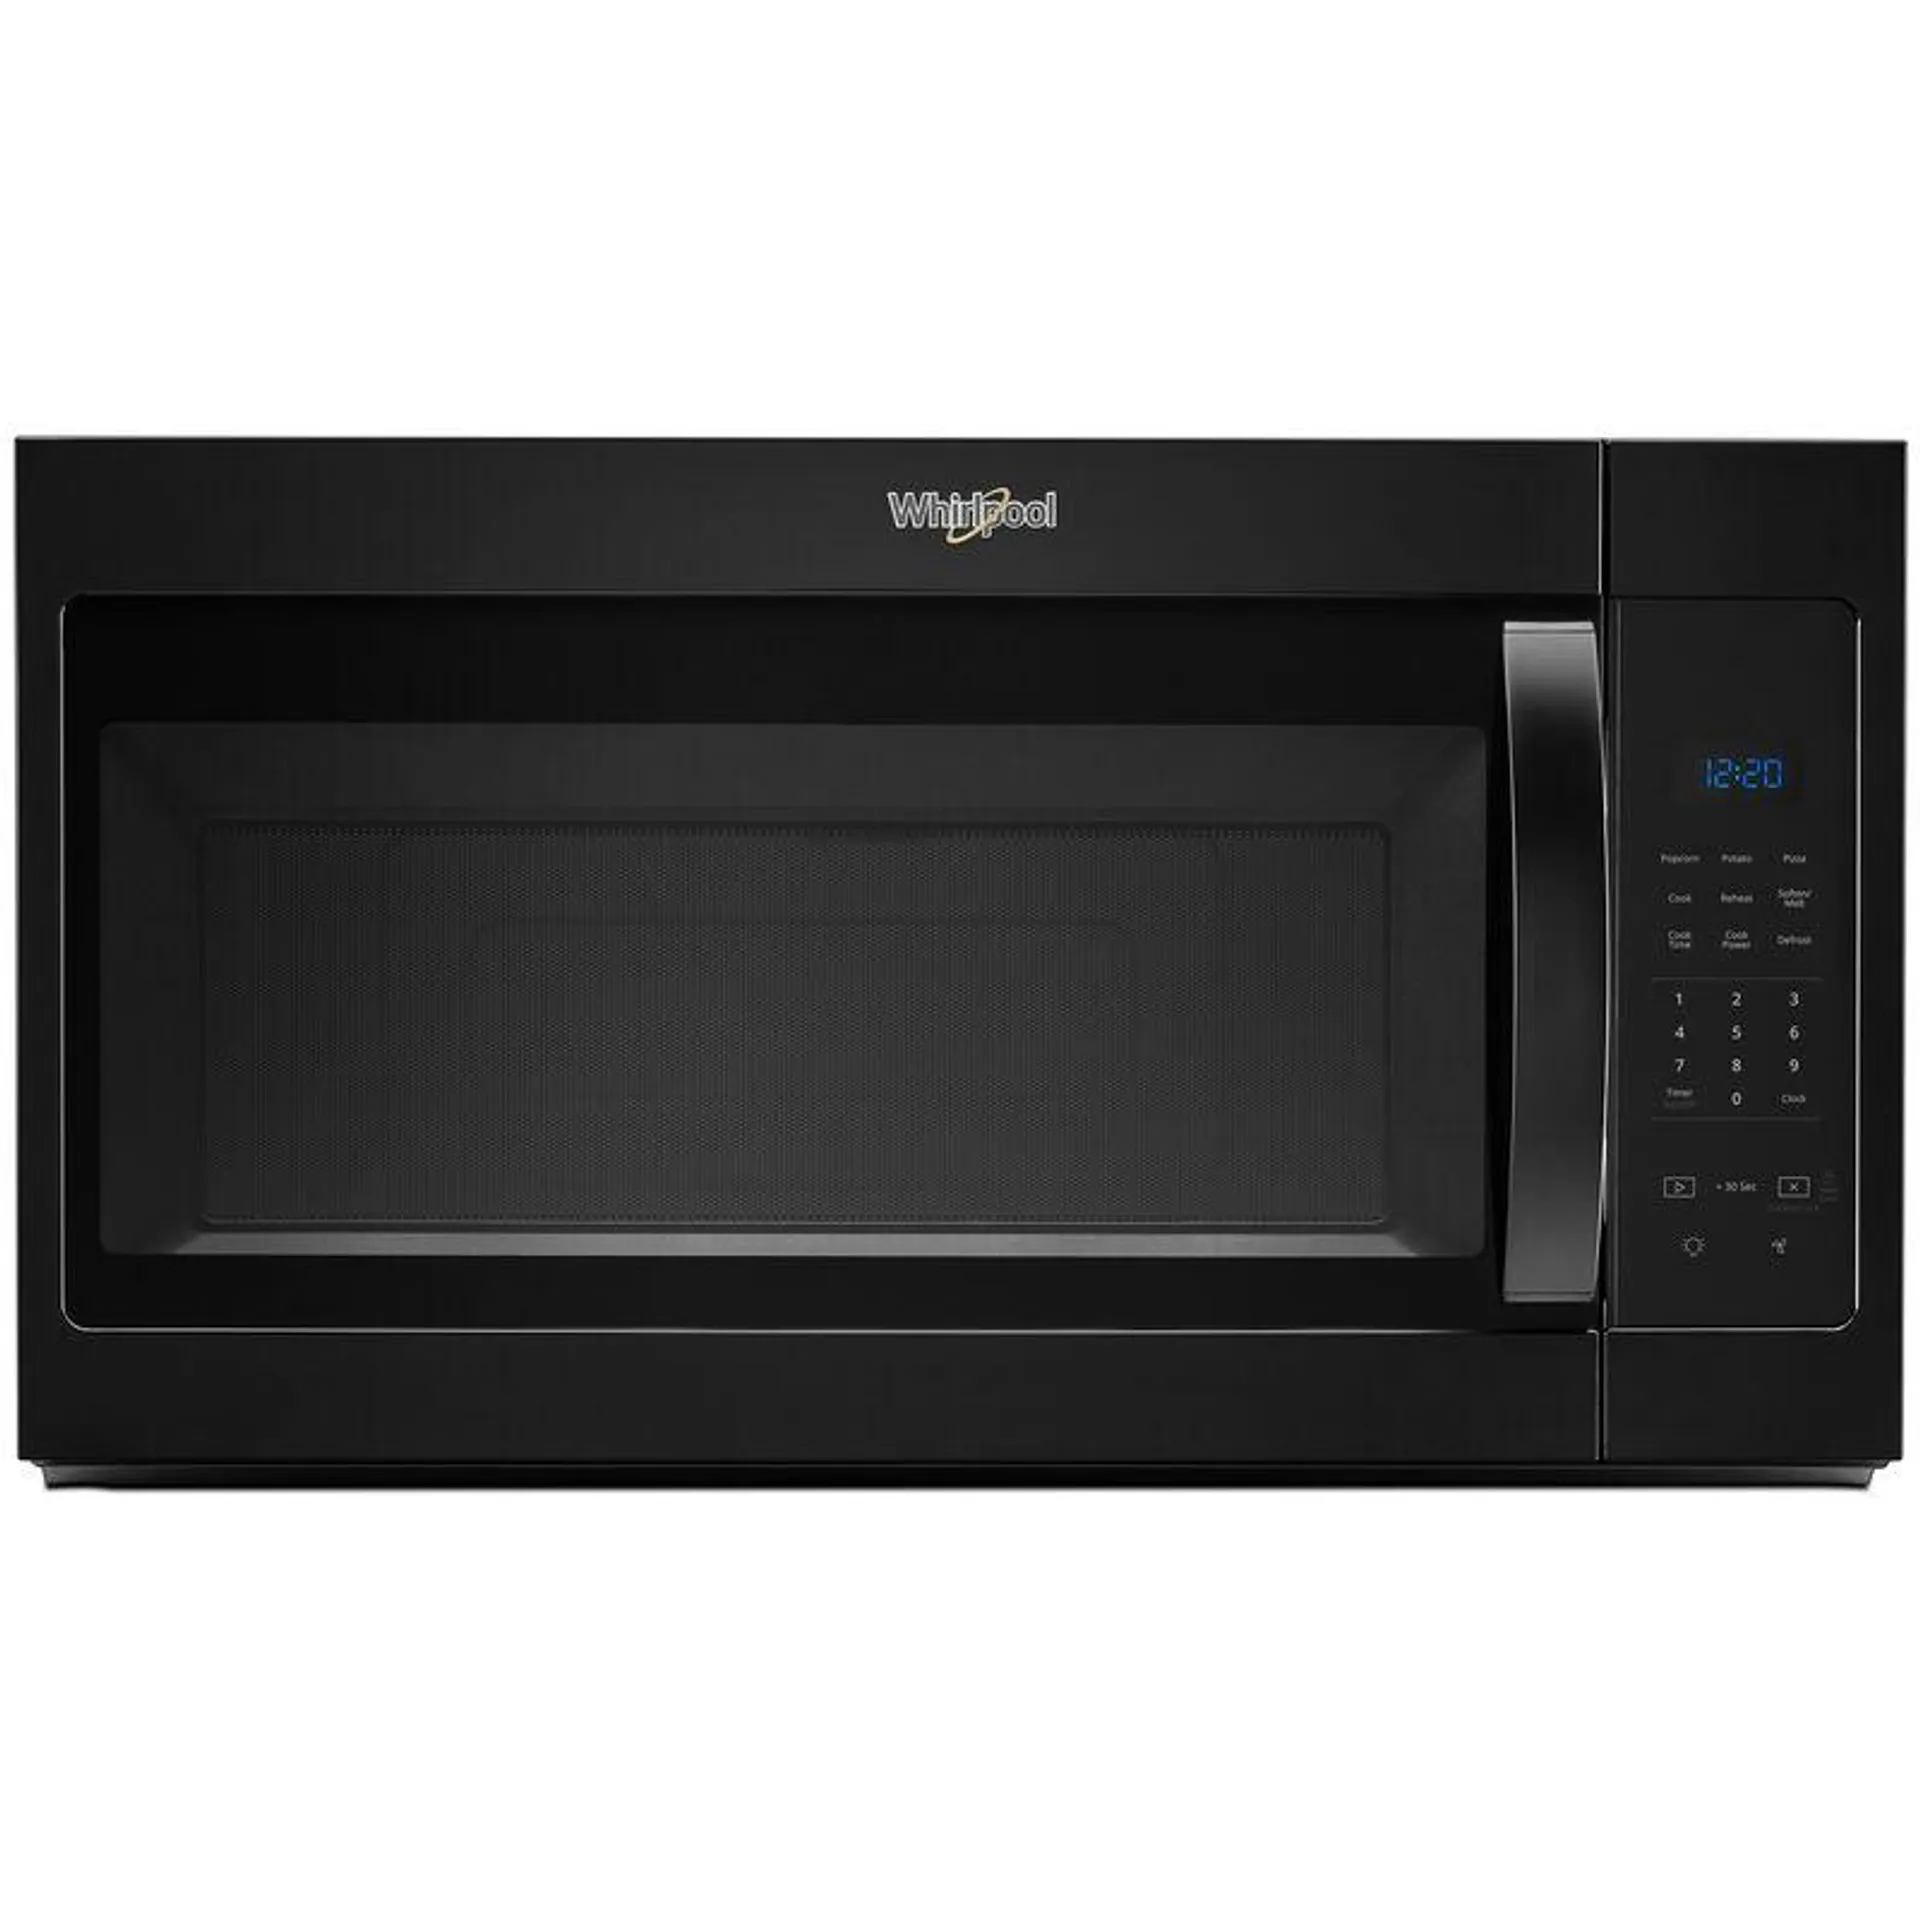 Whirlpool 30" 1.7 Cu. Ft. Over-the-Range Microwave with 10 Power Levels & 300 CFM - Black